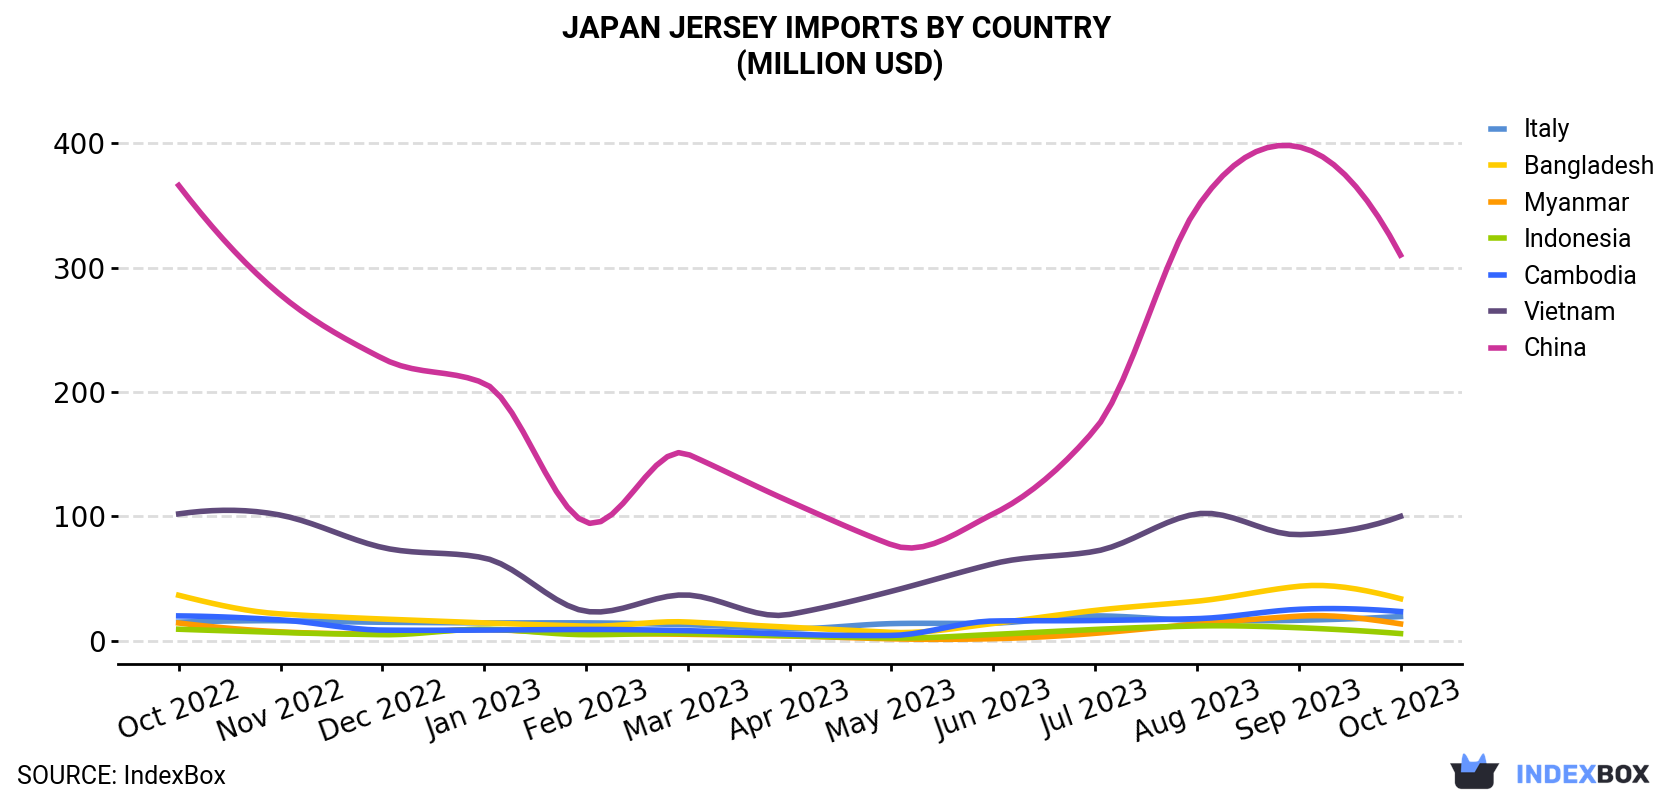 Japan Jersey Imports By Country (Million USD)